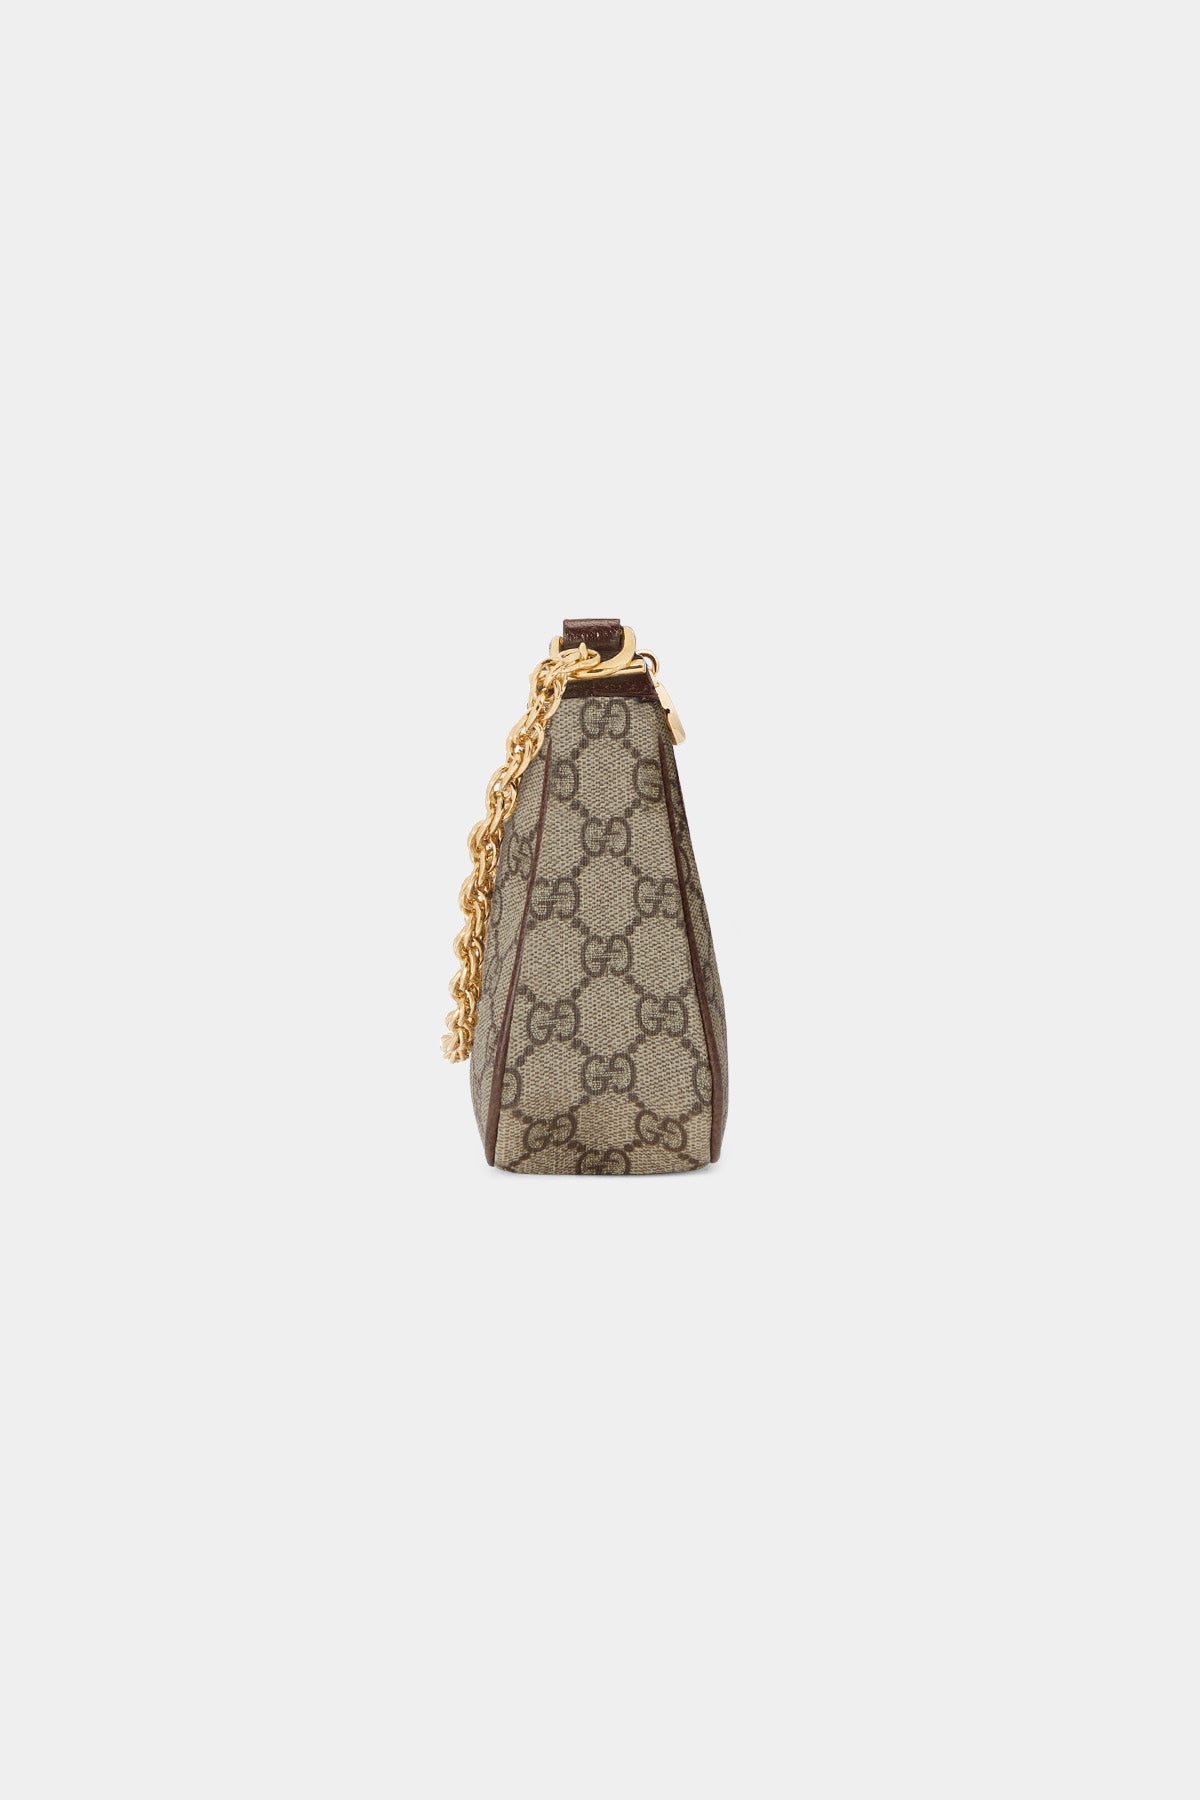 Authentic Gucci Dionysus small GG shoulder bag | Gucci dionysus small, Bags,  Gucci dionysus